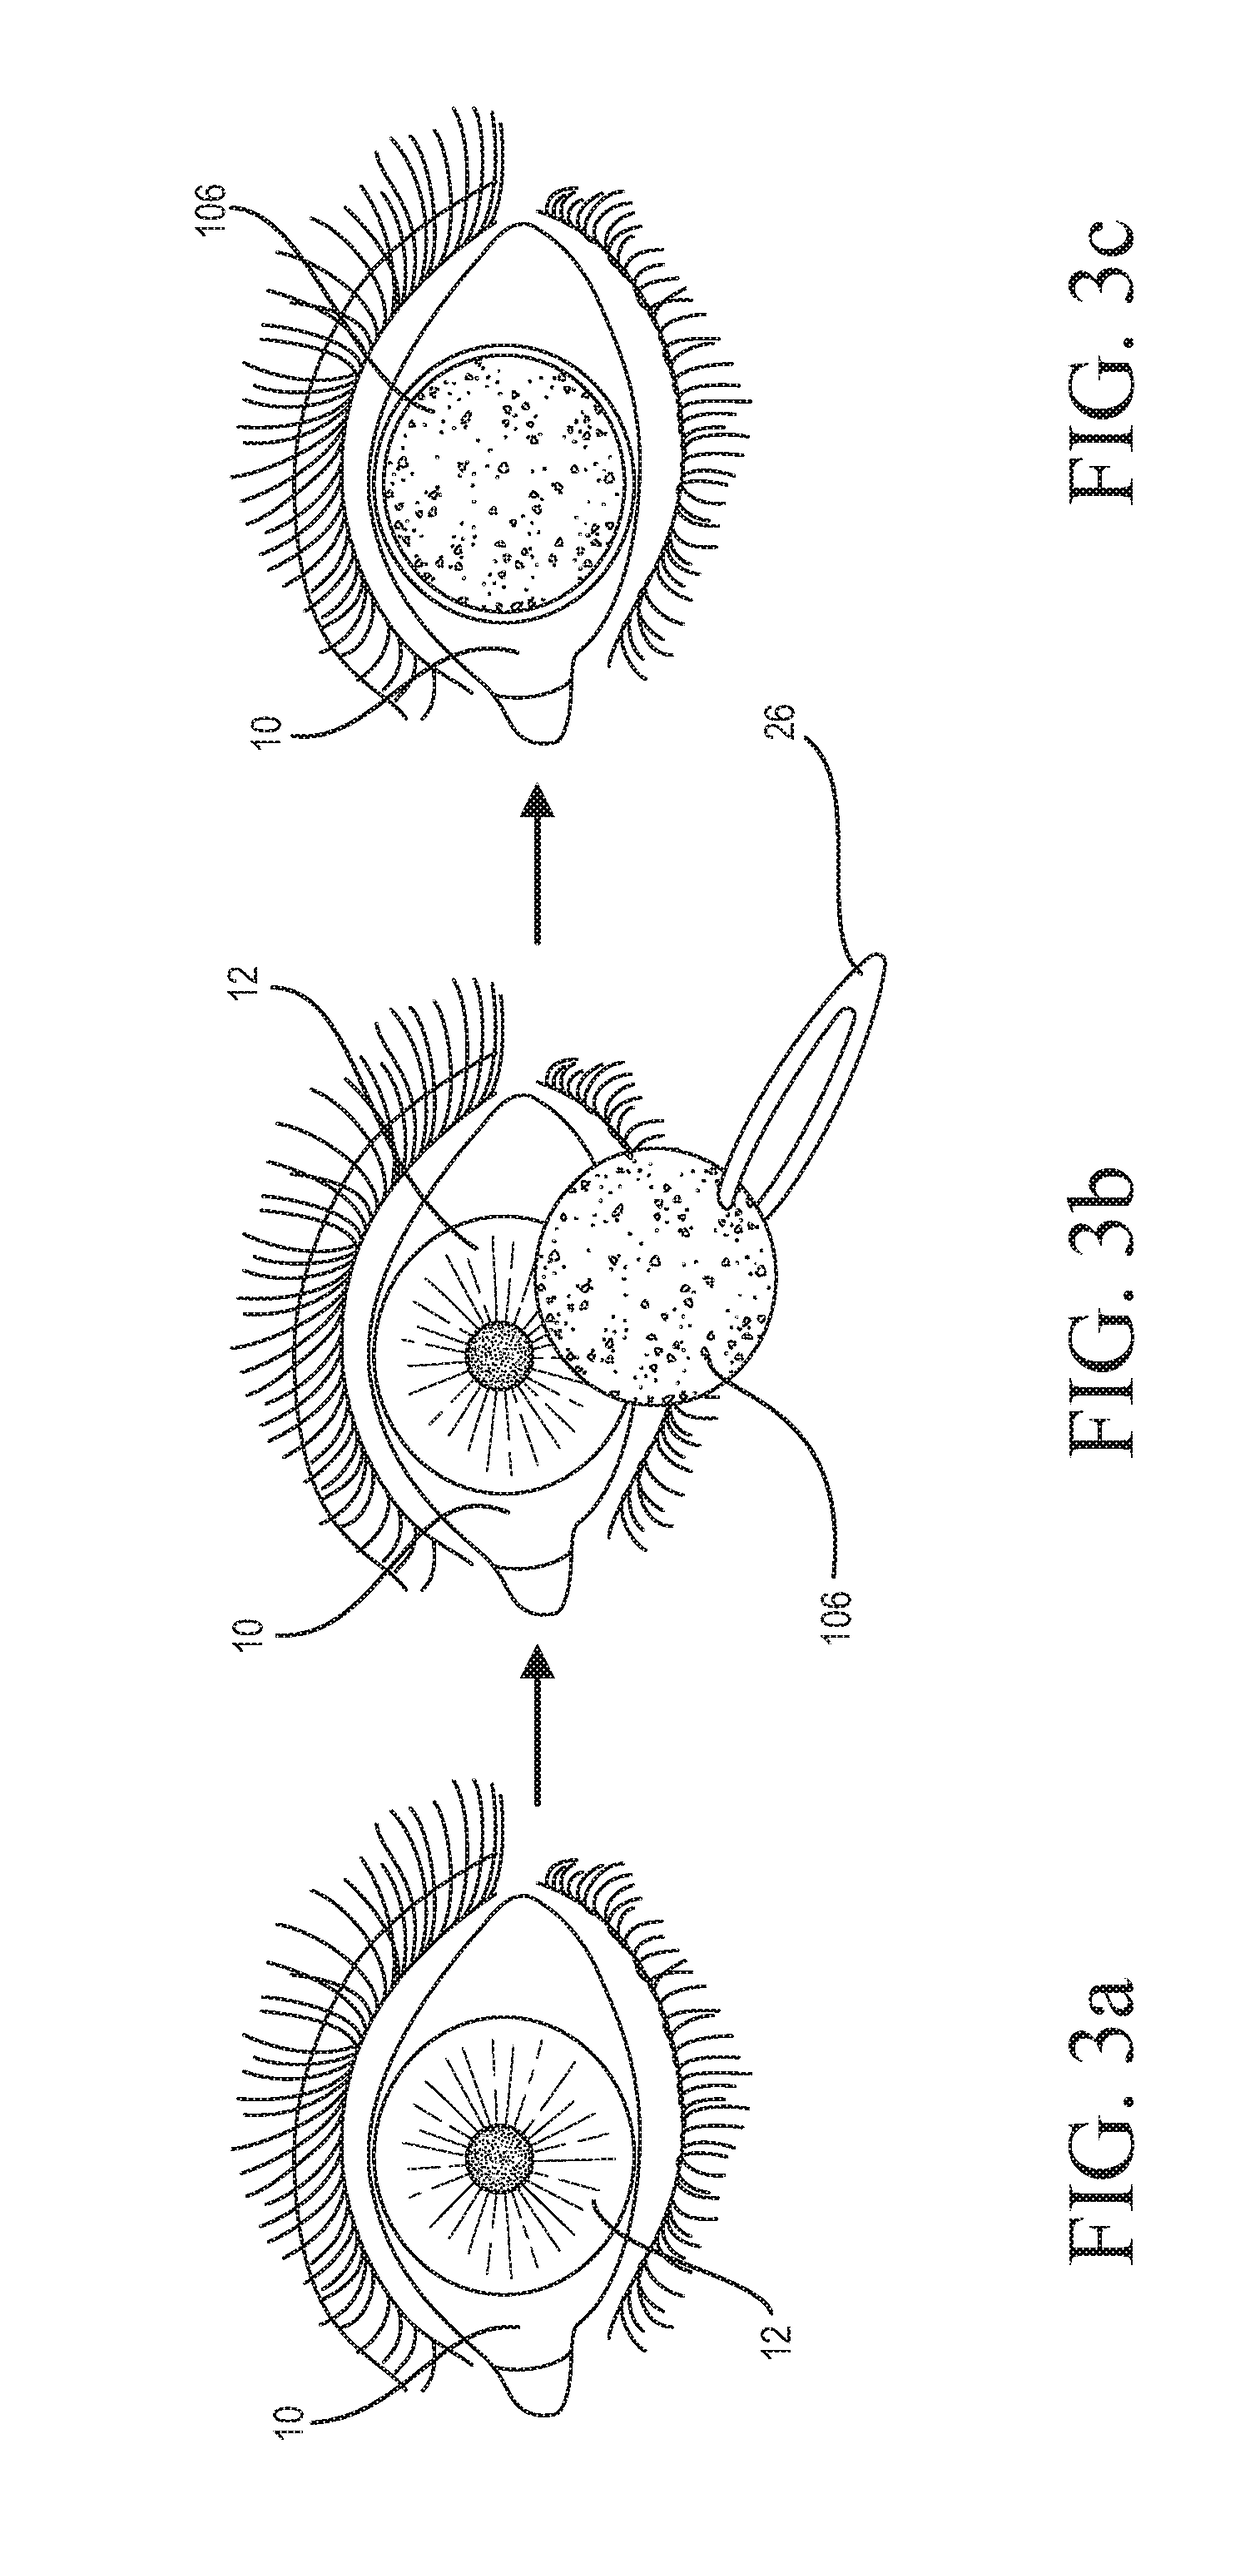 System and method for the delivery of medications or fluids to the eye